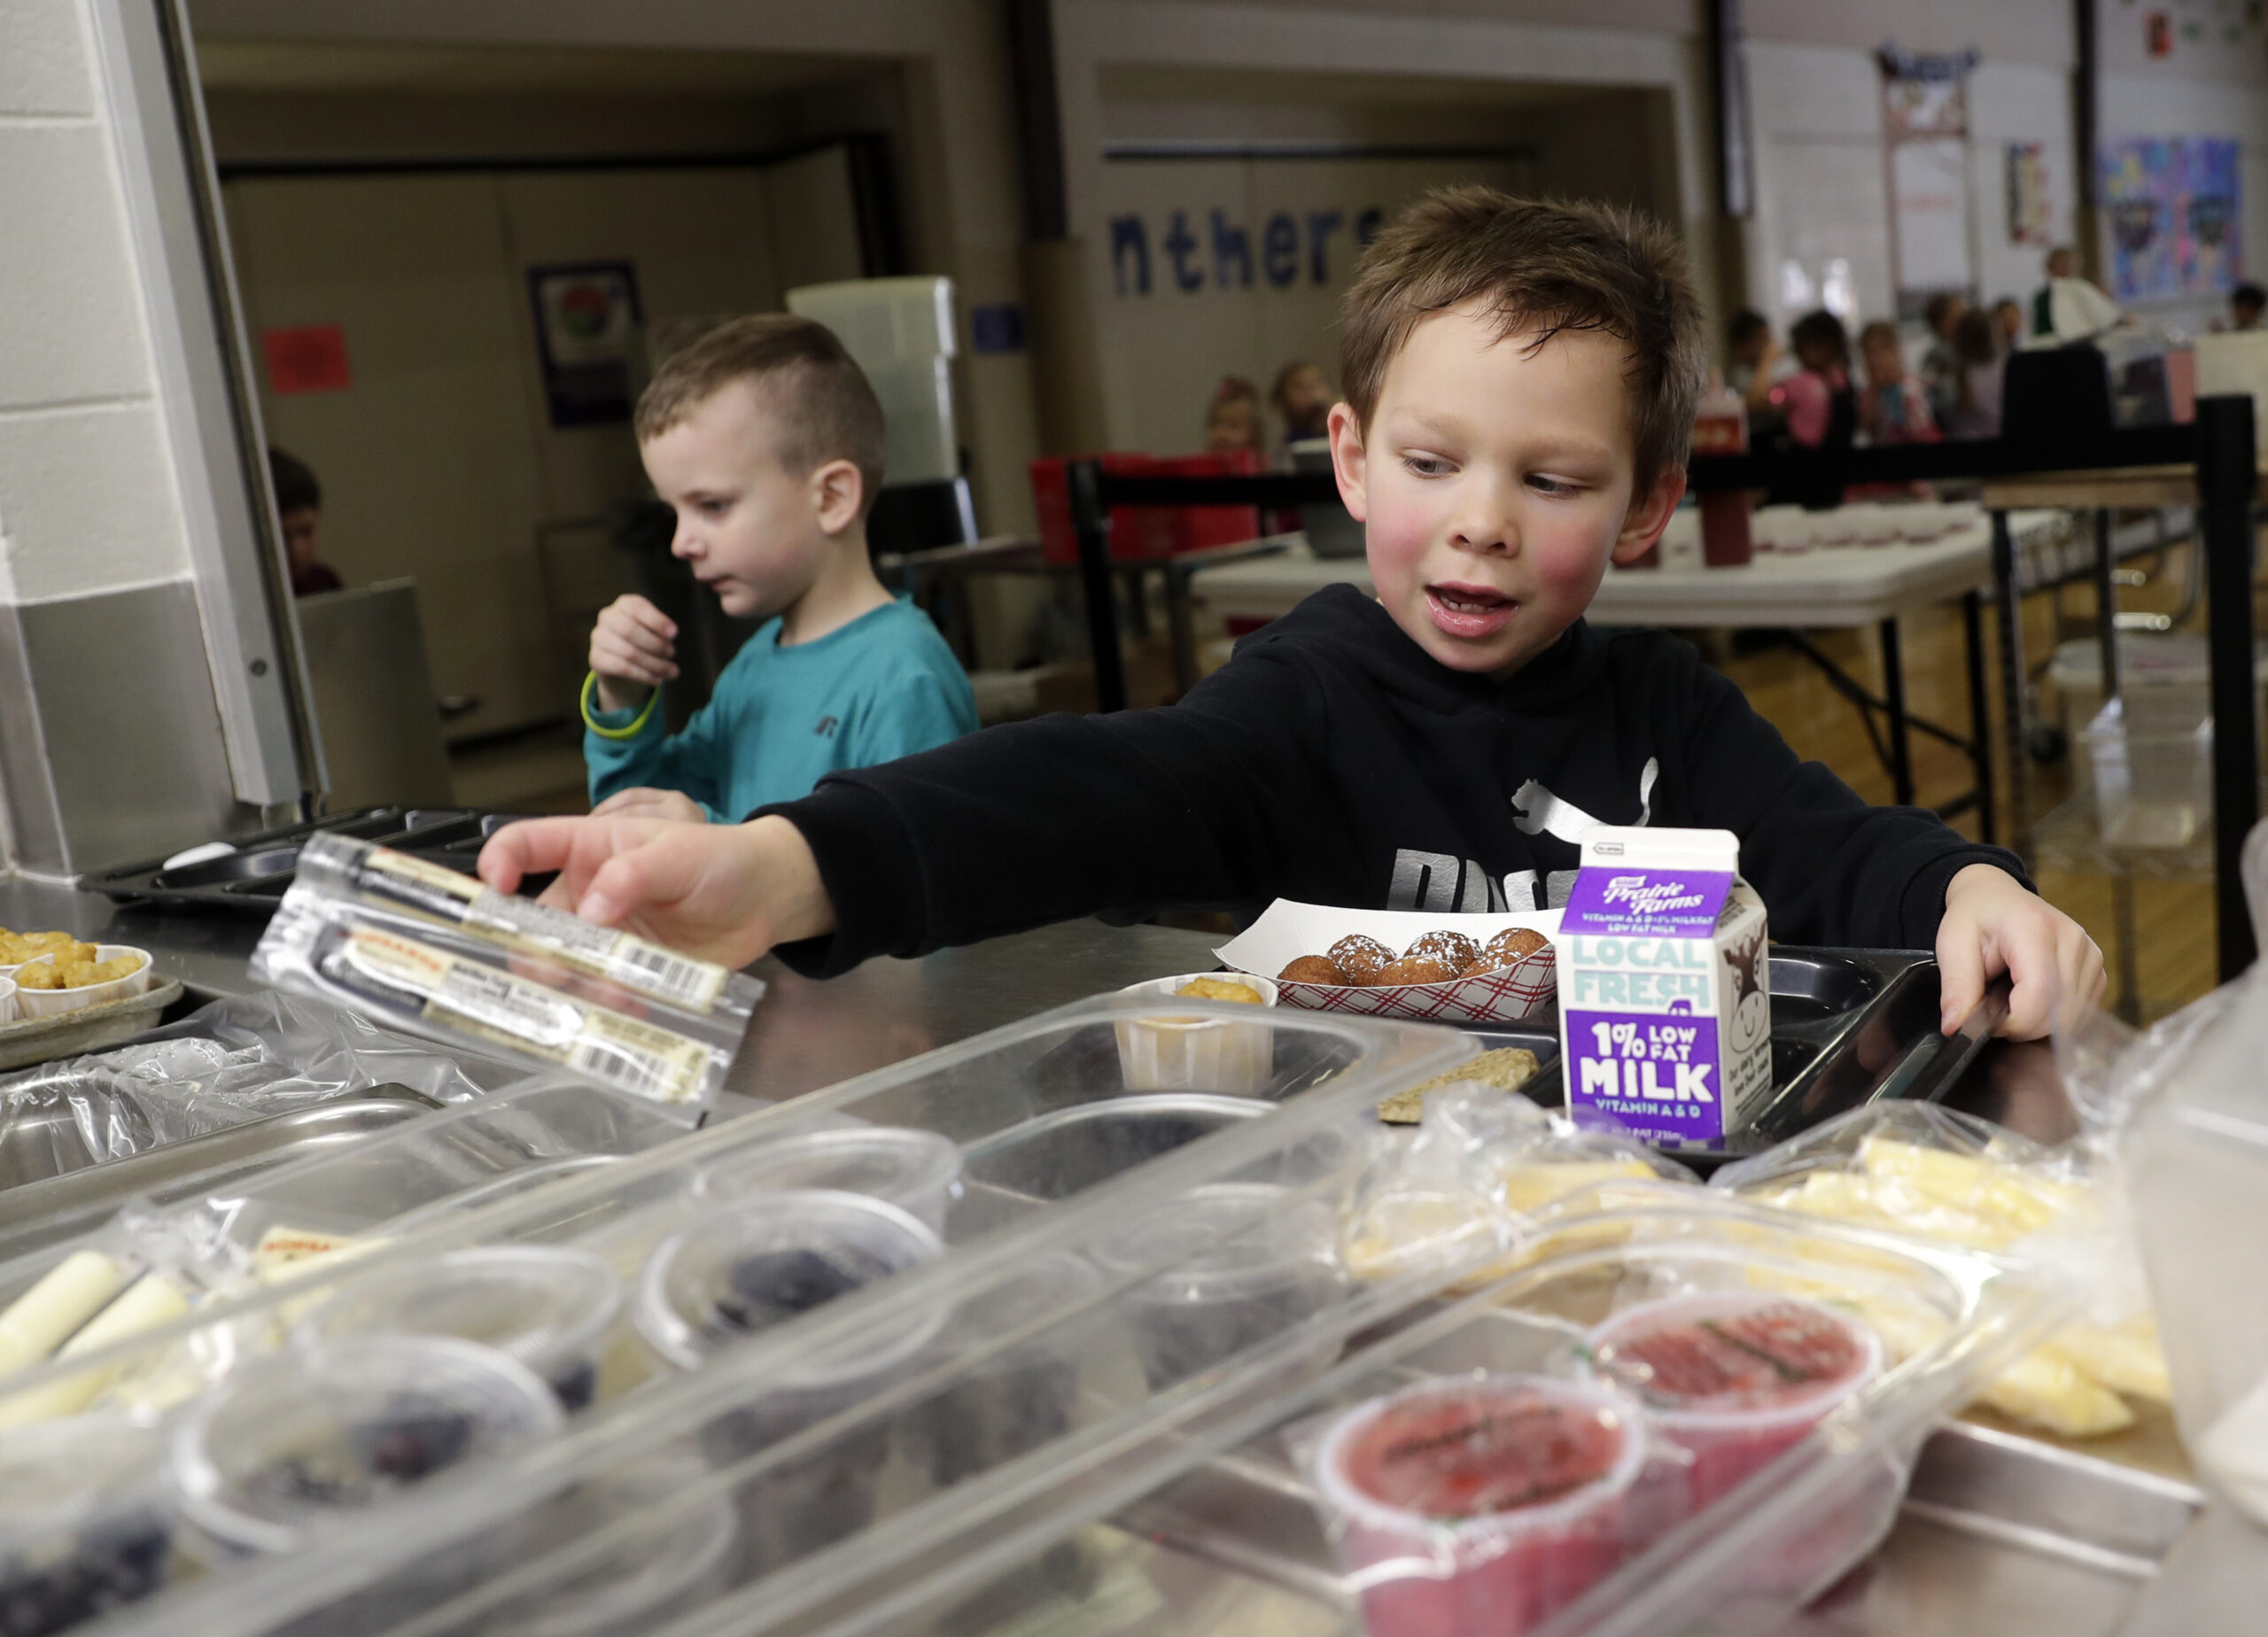 Kindergarten students at Suamico Elementary School go through the hot lunch line